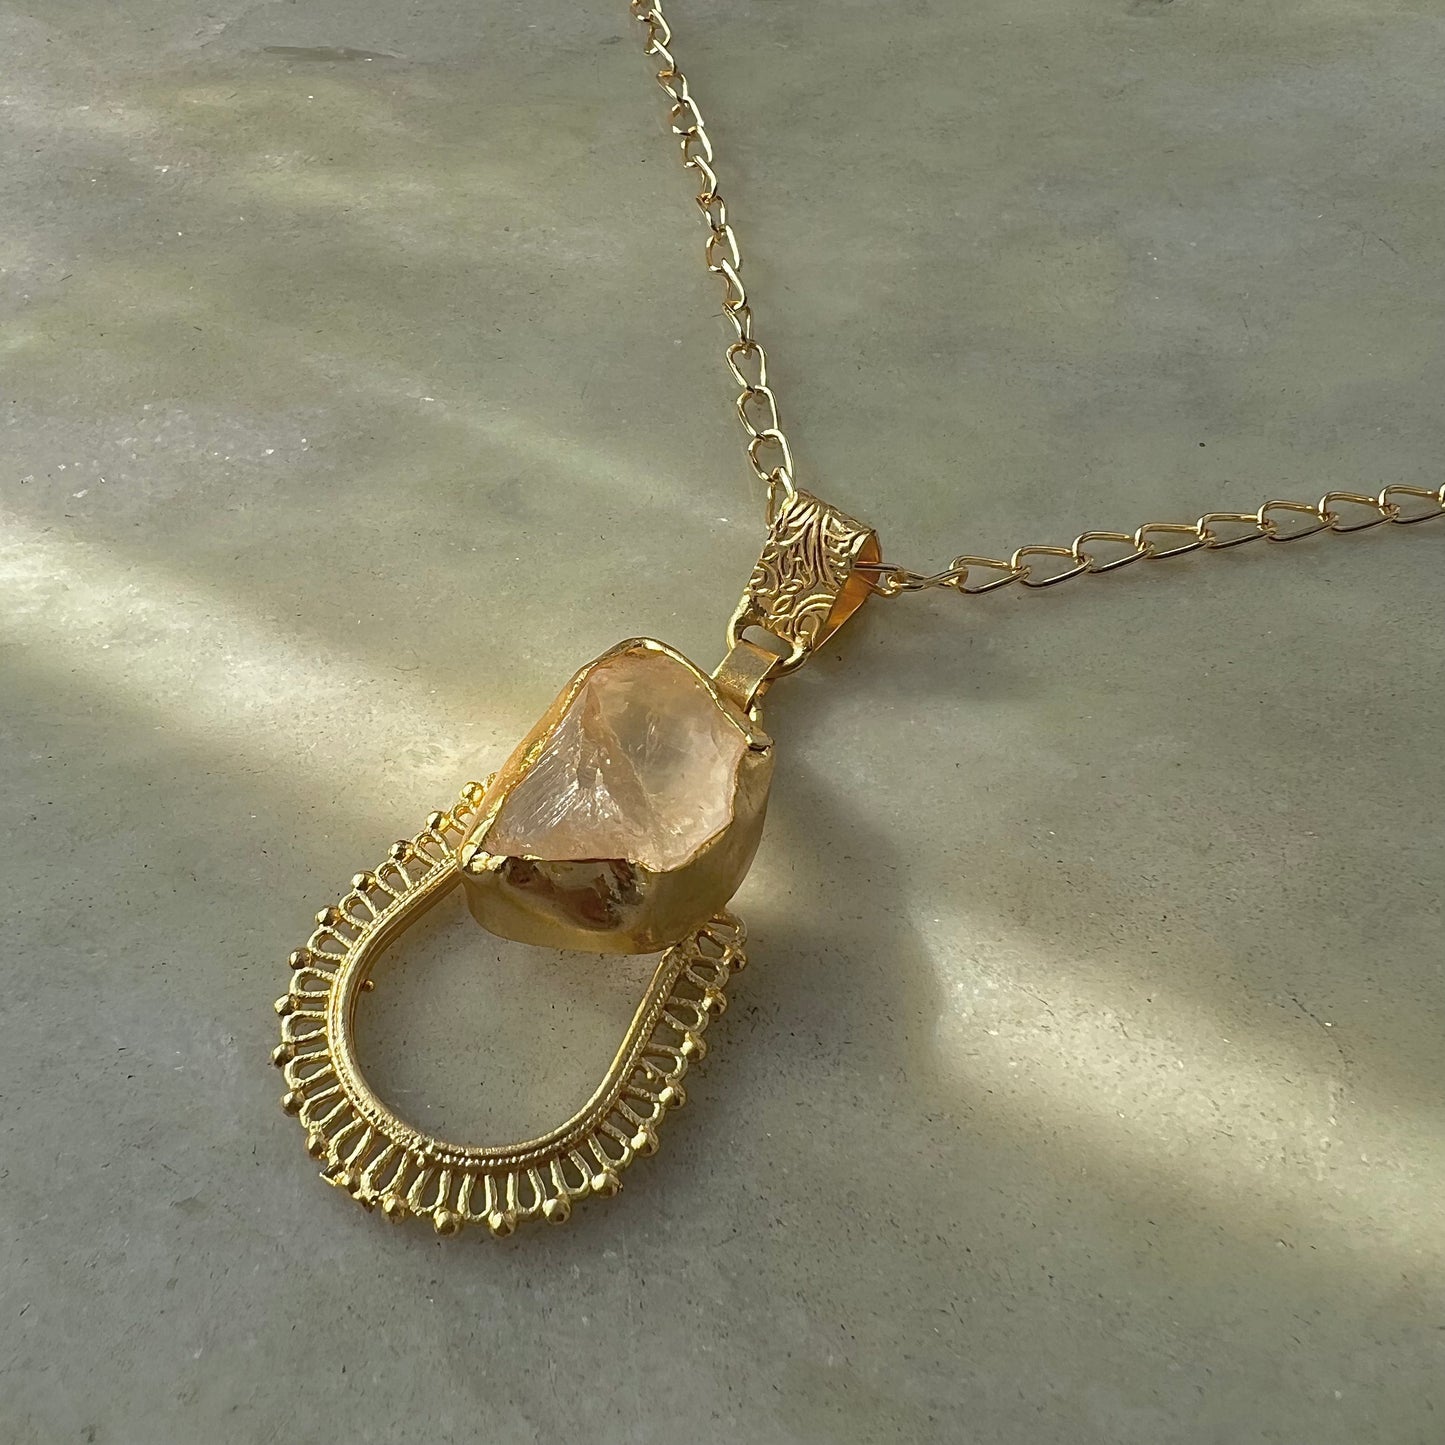 Clear Quartz Crystal Gold Plated Pendant Chain